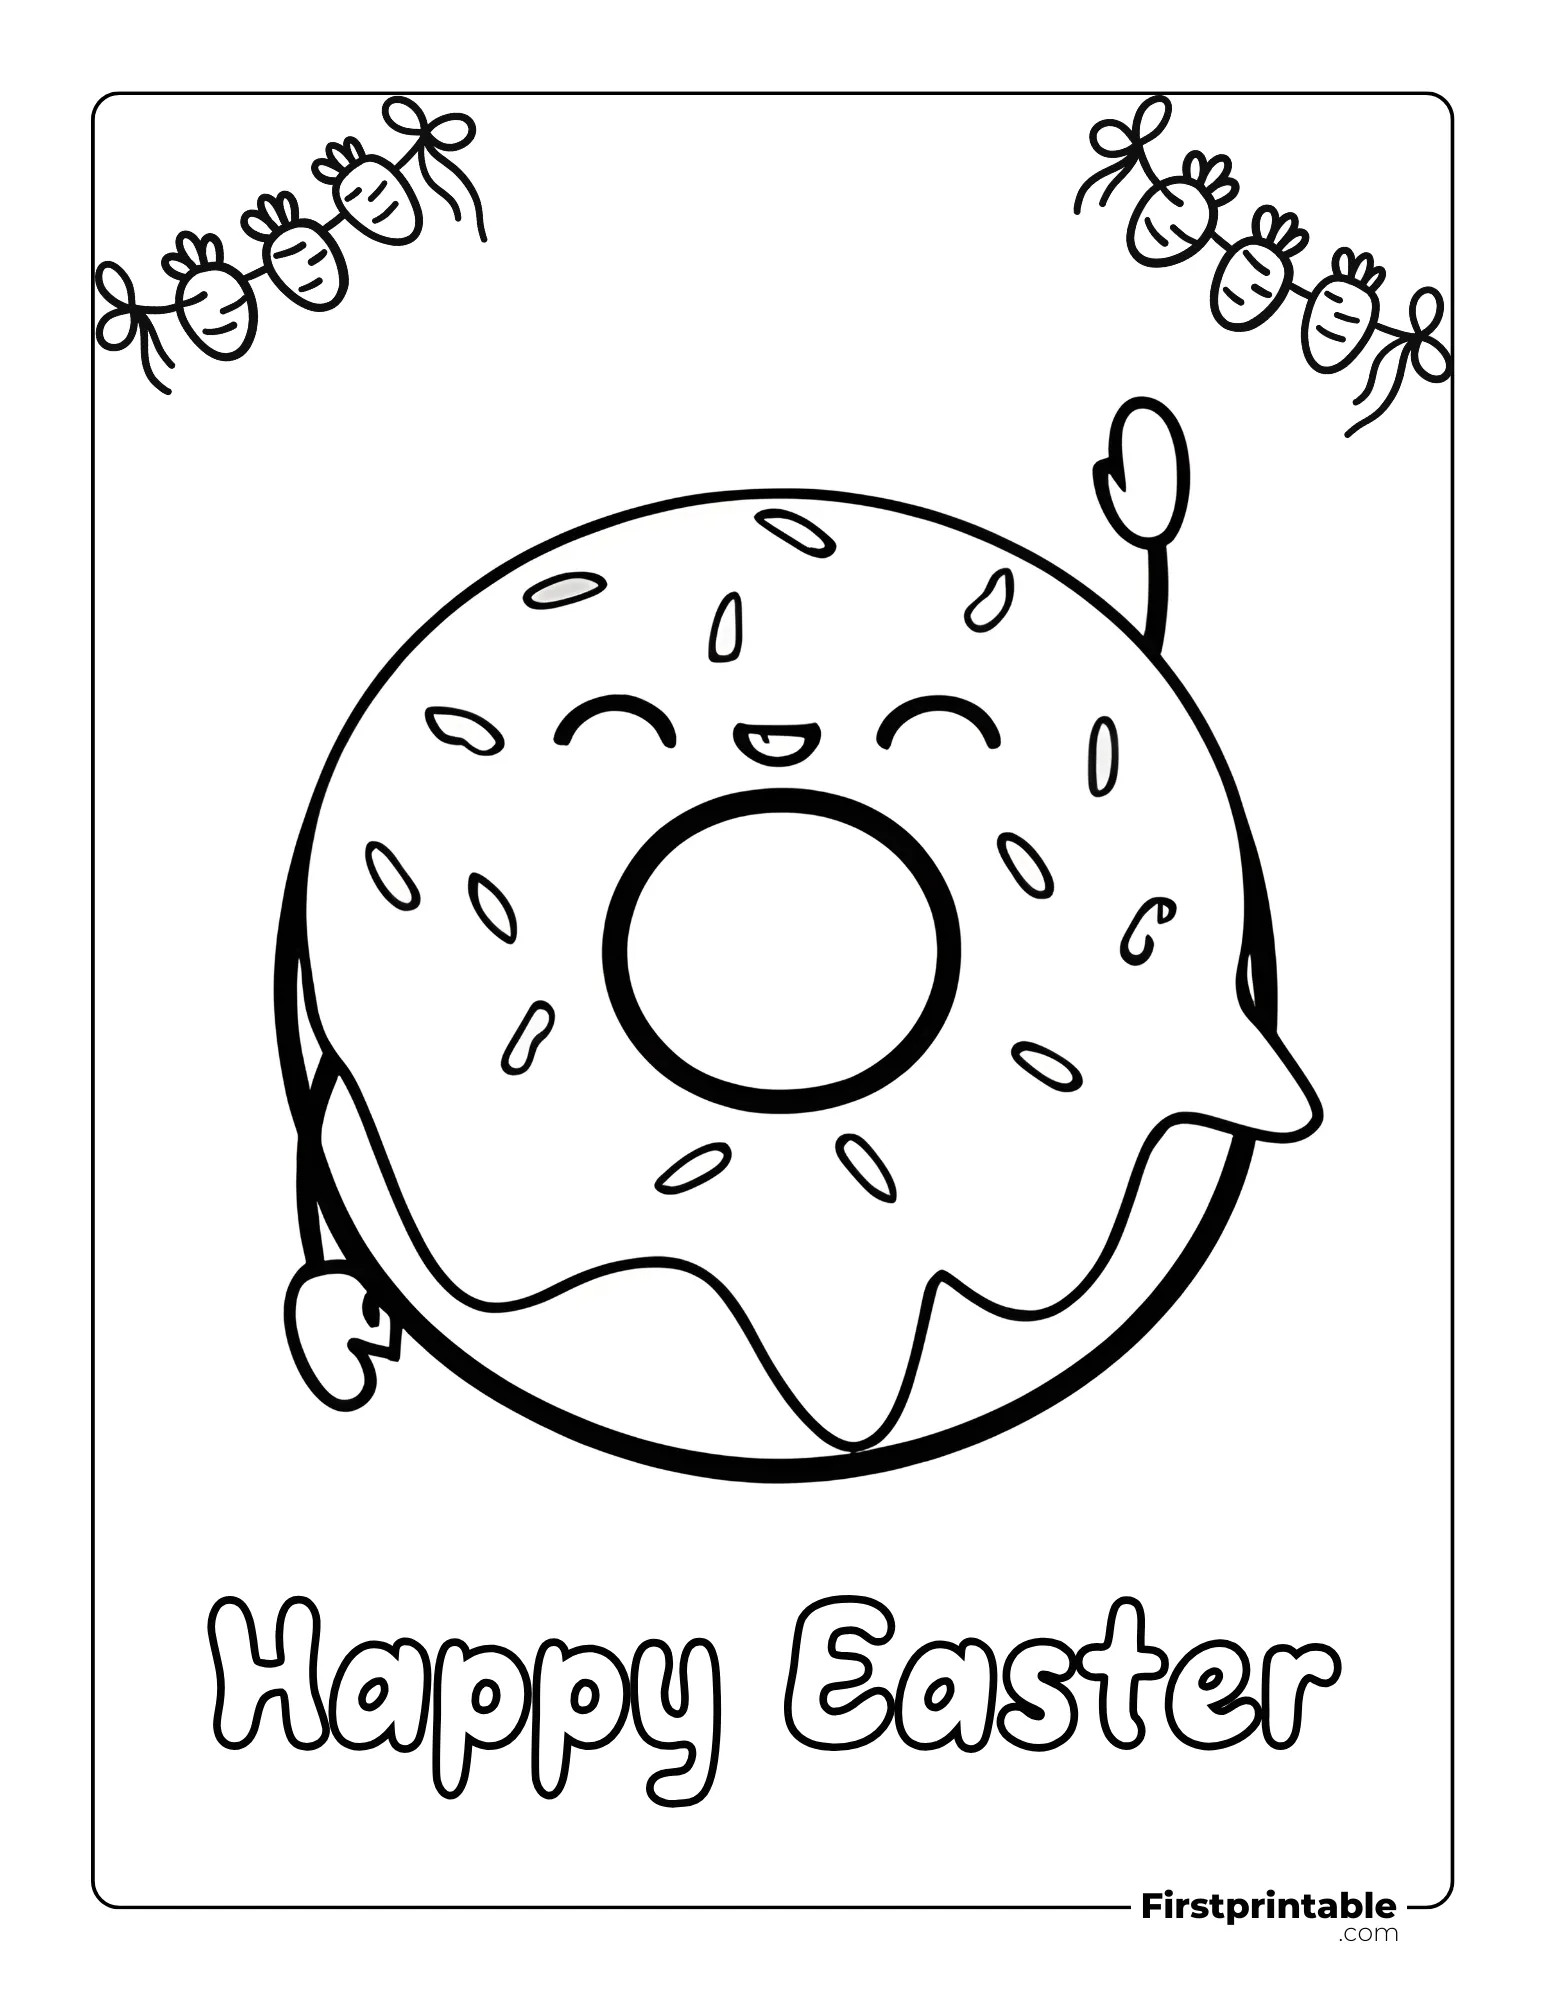 Happy Easter donut to color